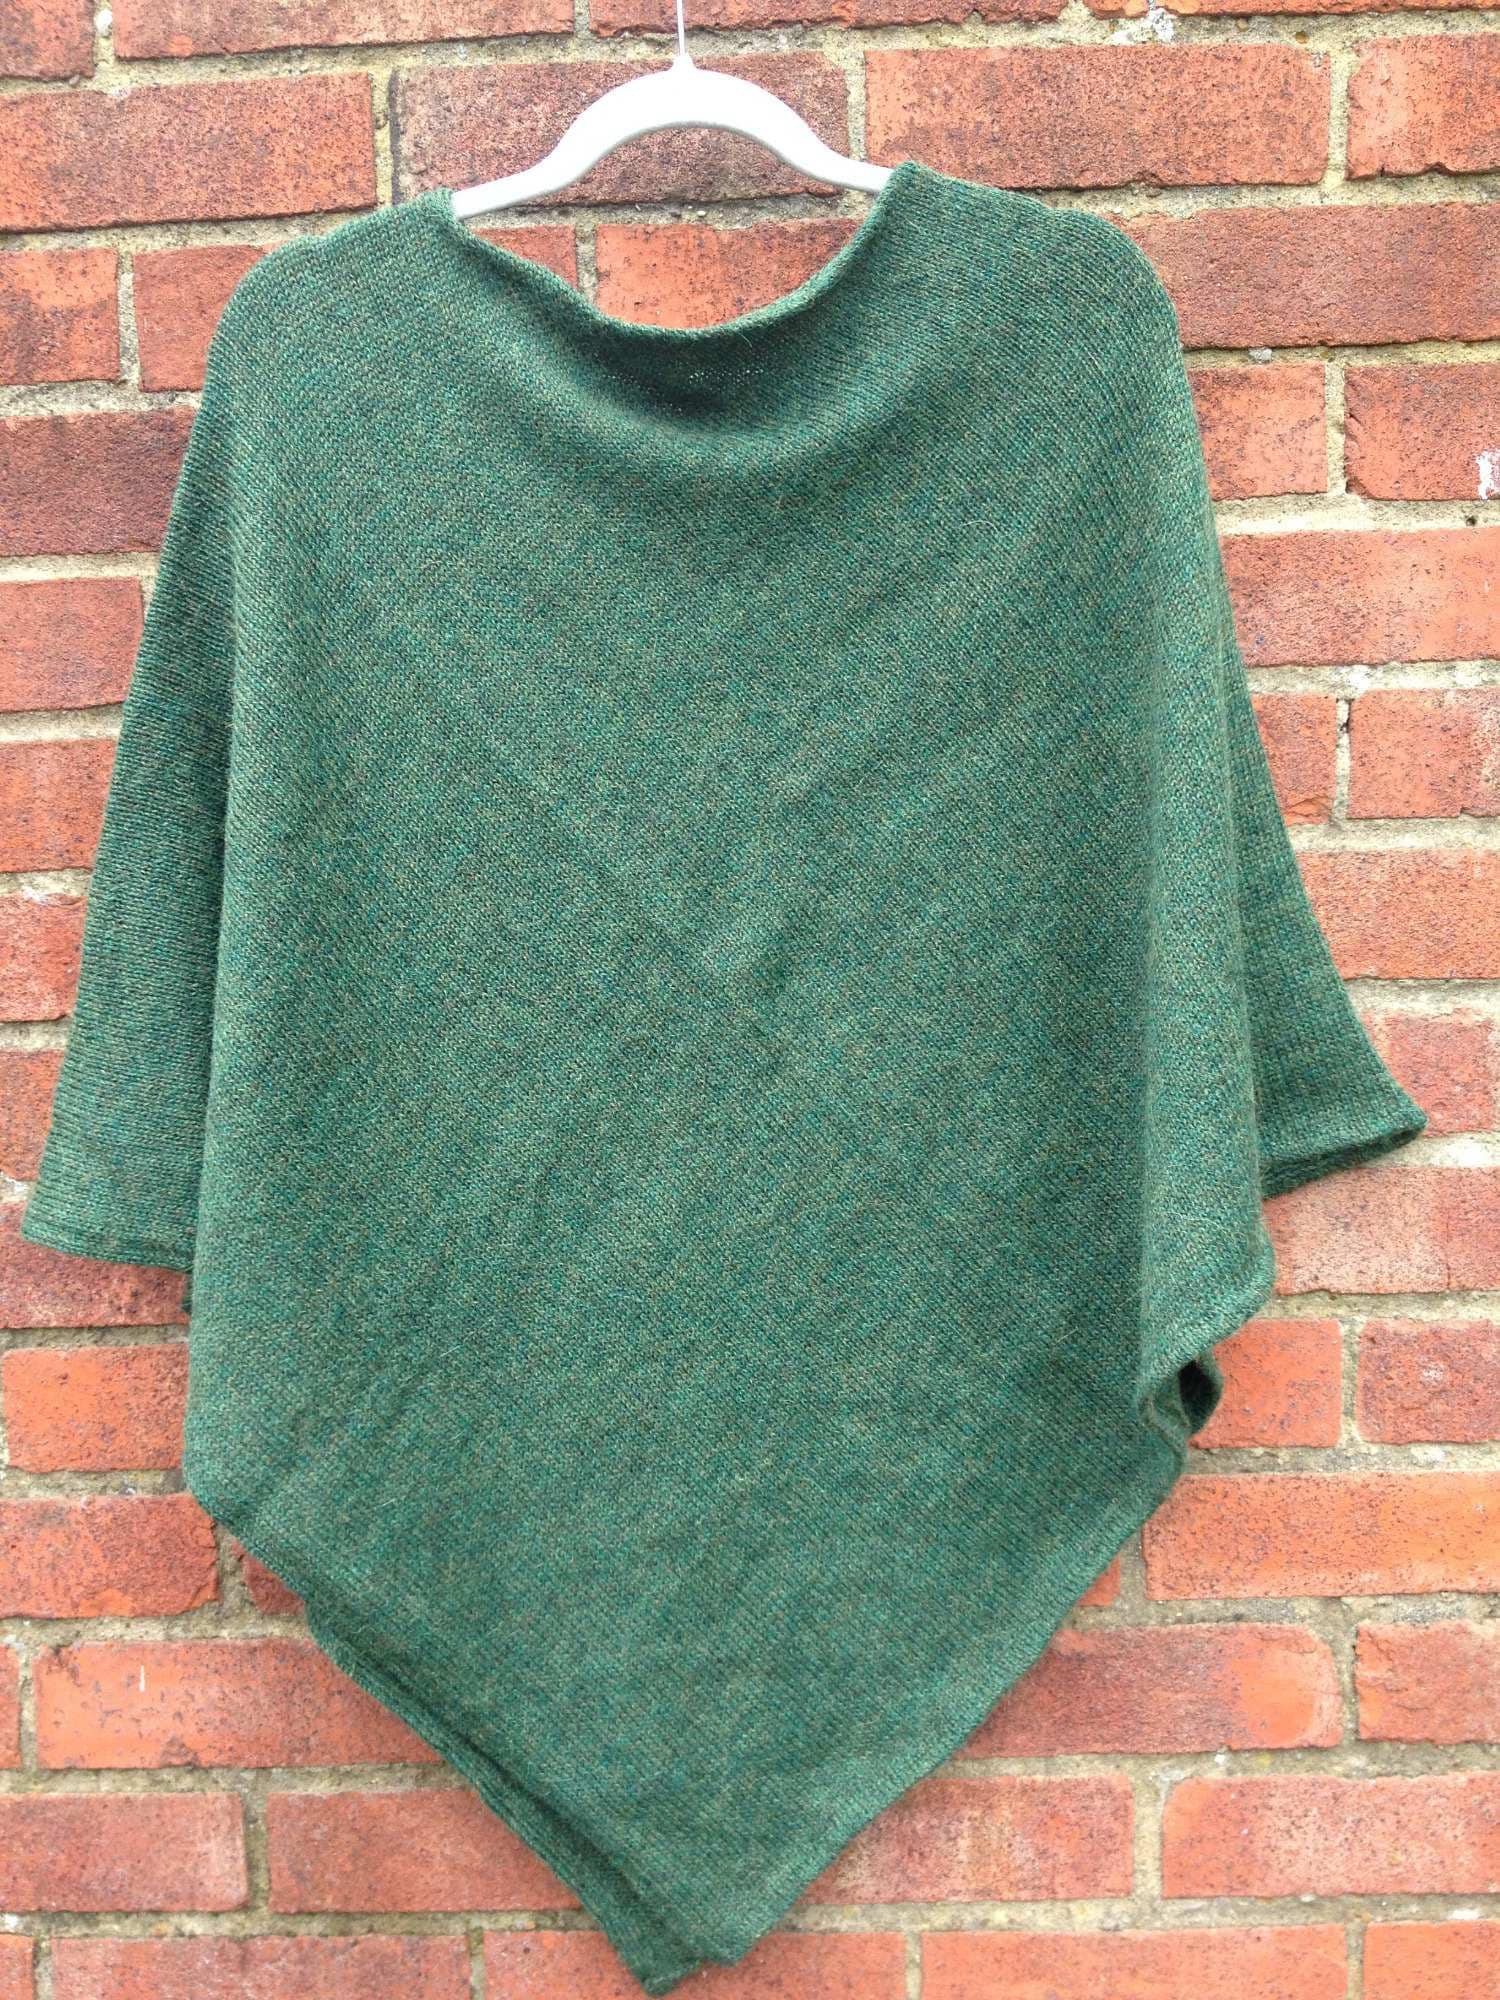 100% Alpaca Poncho, knitted wool, loose fit warm wrap, woollen shawl, winter knit, travel cloak, plastic free, ethical gift for women